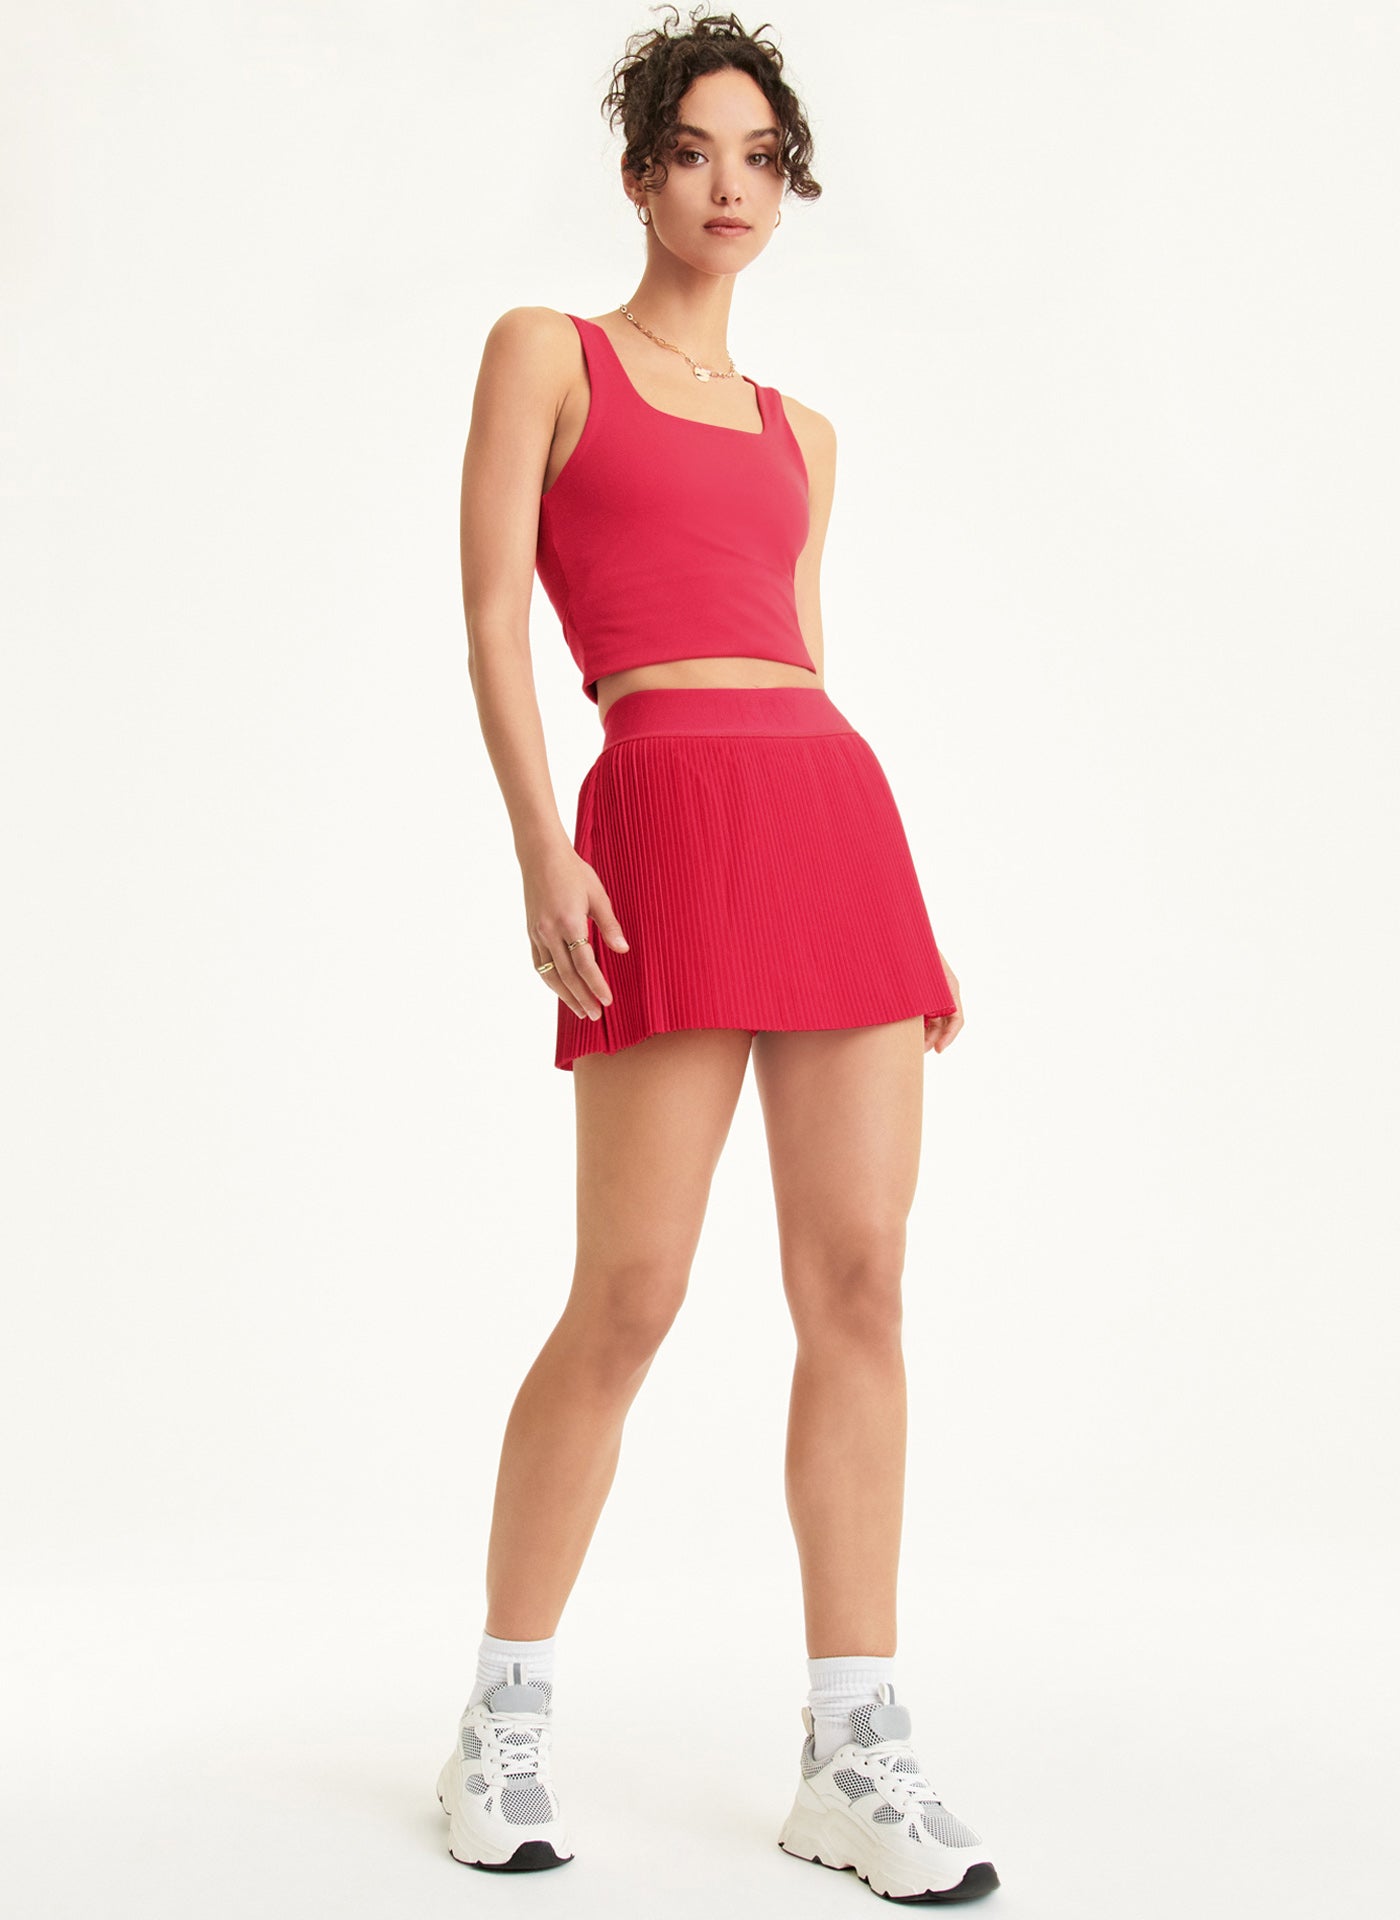 DKNY DOUBLE LAYER SKORT,Pink